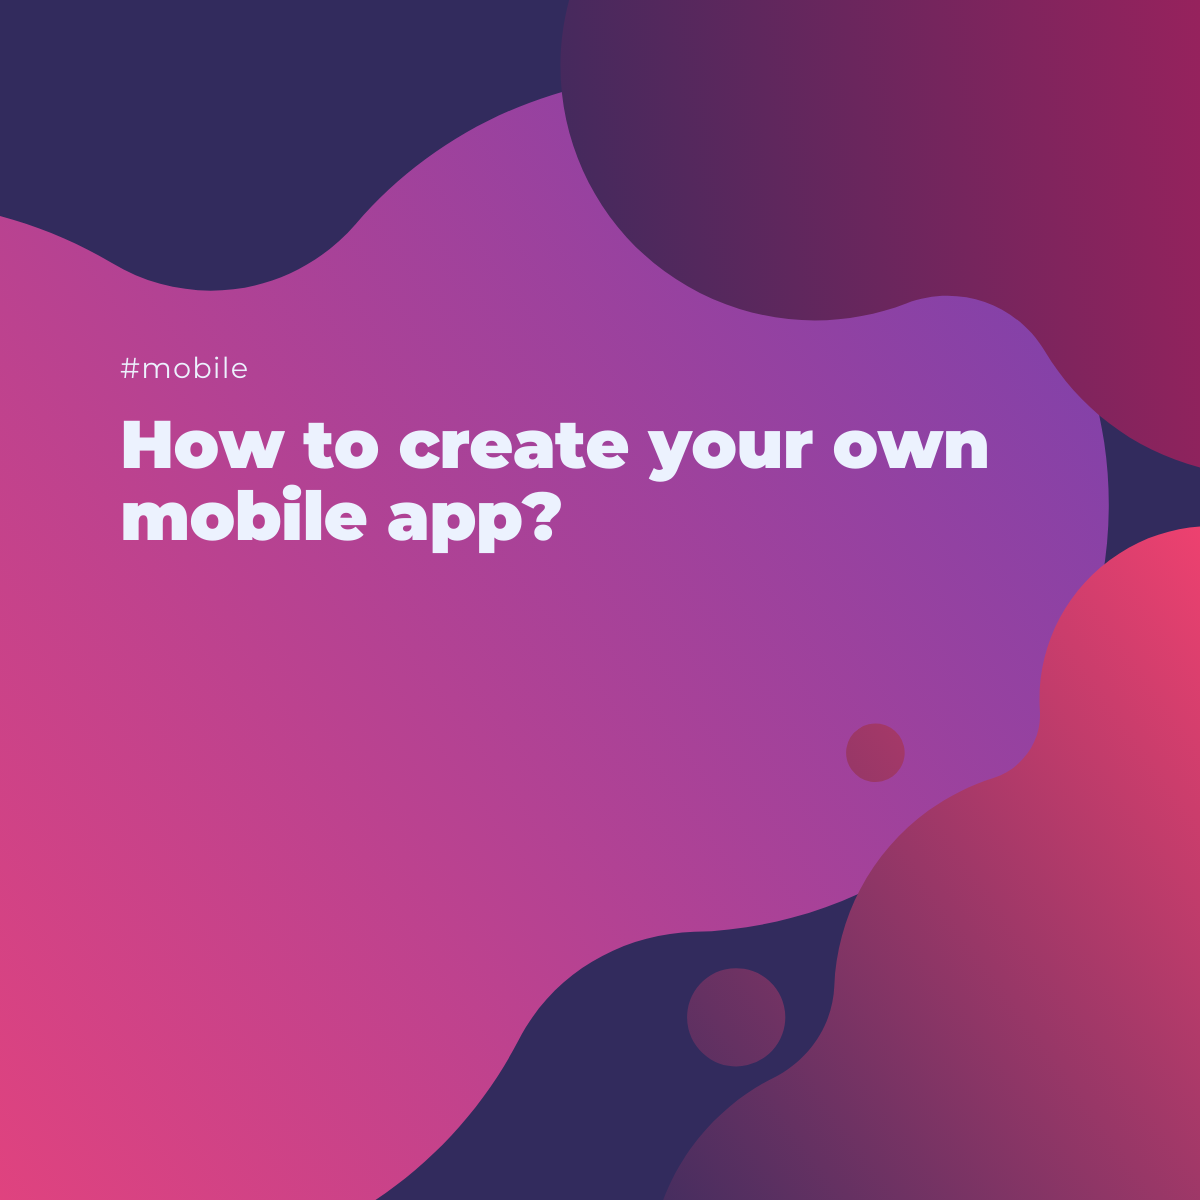 How to create your own mobile app?